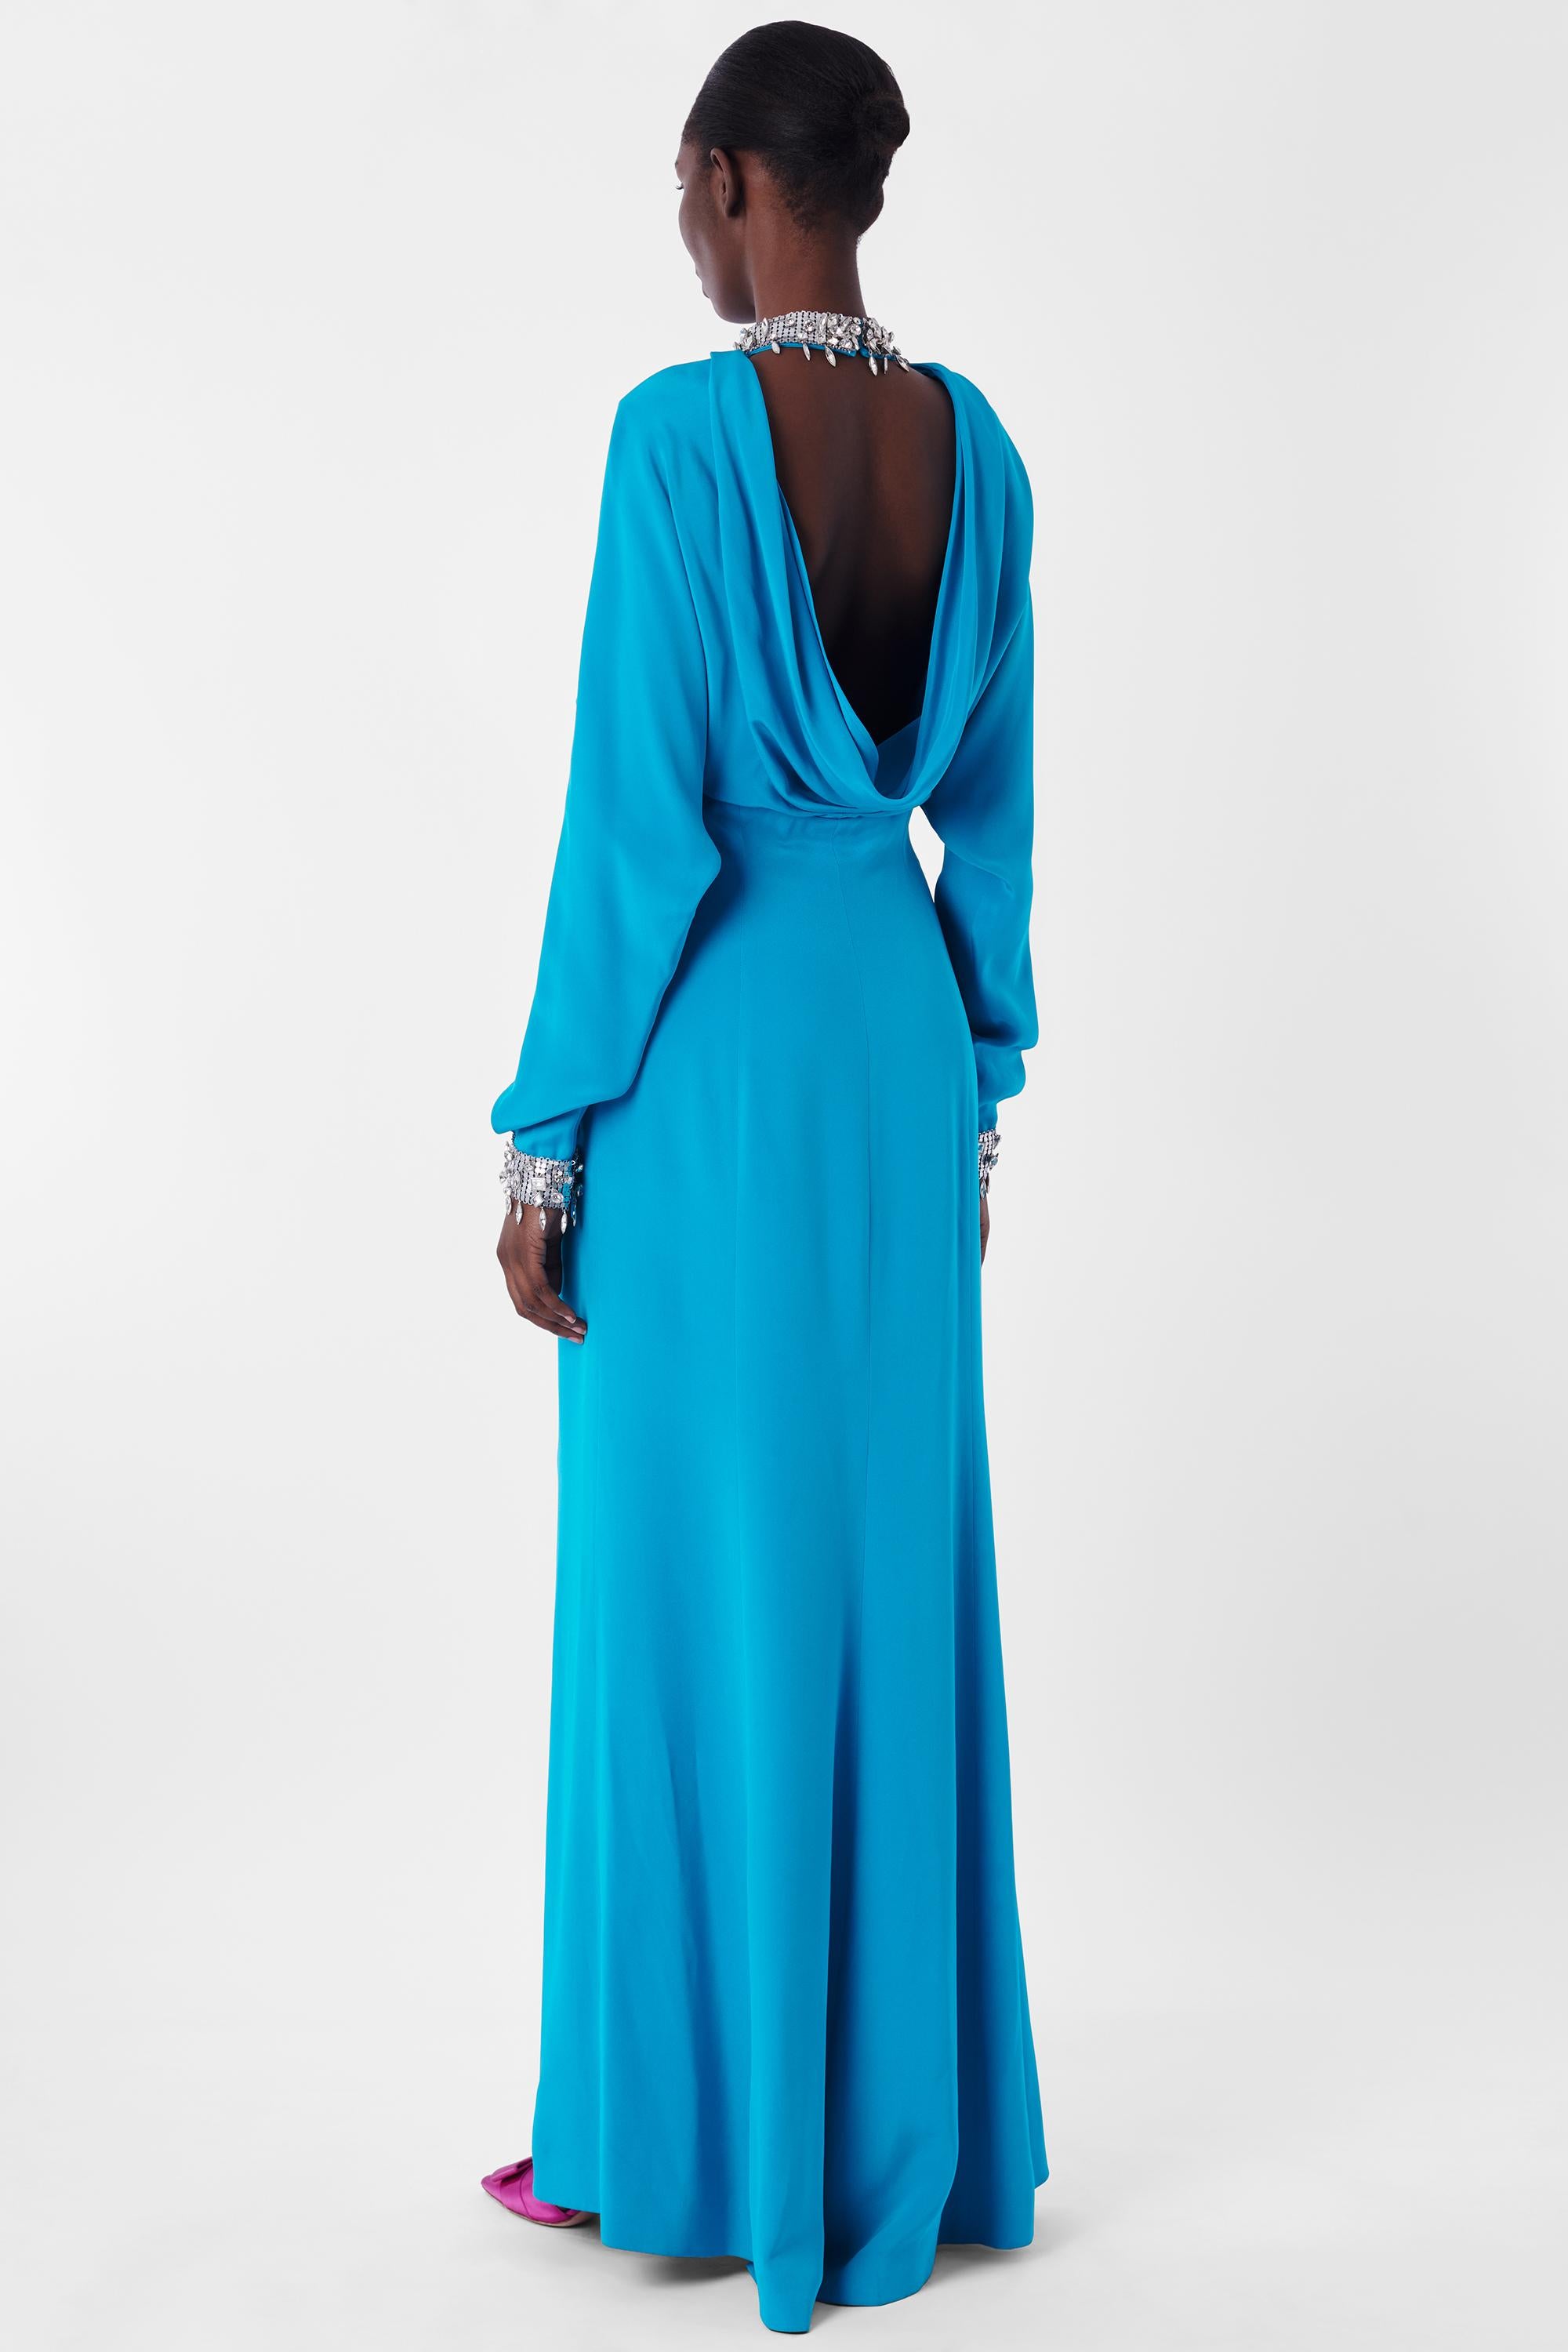 Thierry Mugler 1995 Couture Blue Gown. Features diamante silver collar and cuffs, keyhole neckline, long sleeves and draped back in maxi length with front slit with concealed side zipper for closure. In excellent vintage condition.

Brand: Thierry